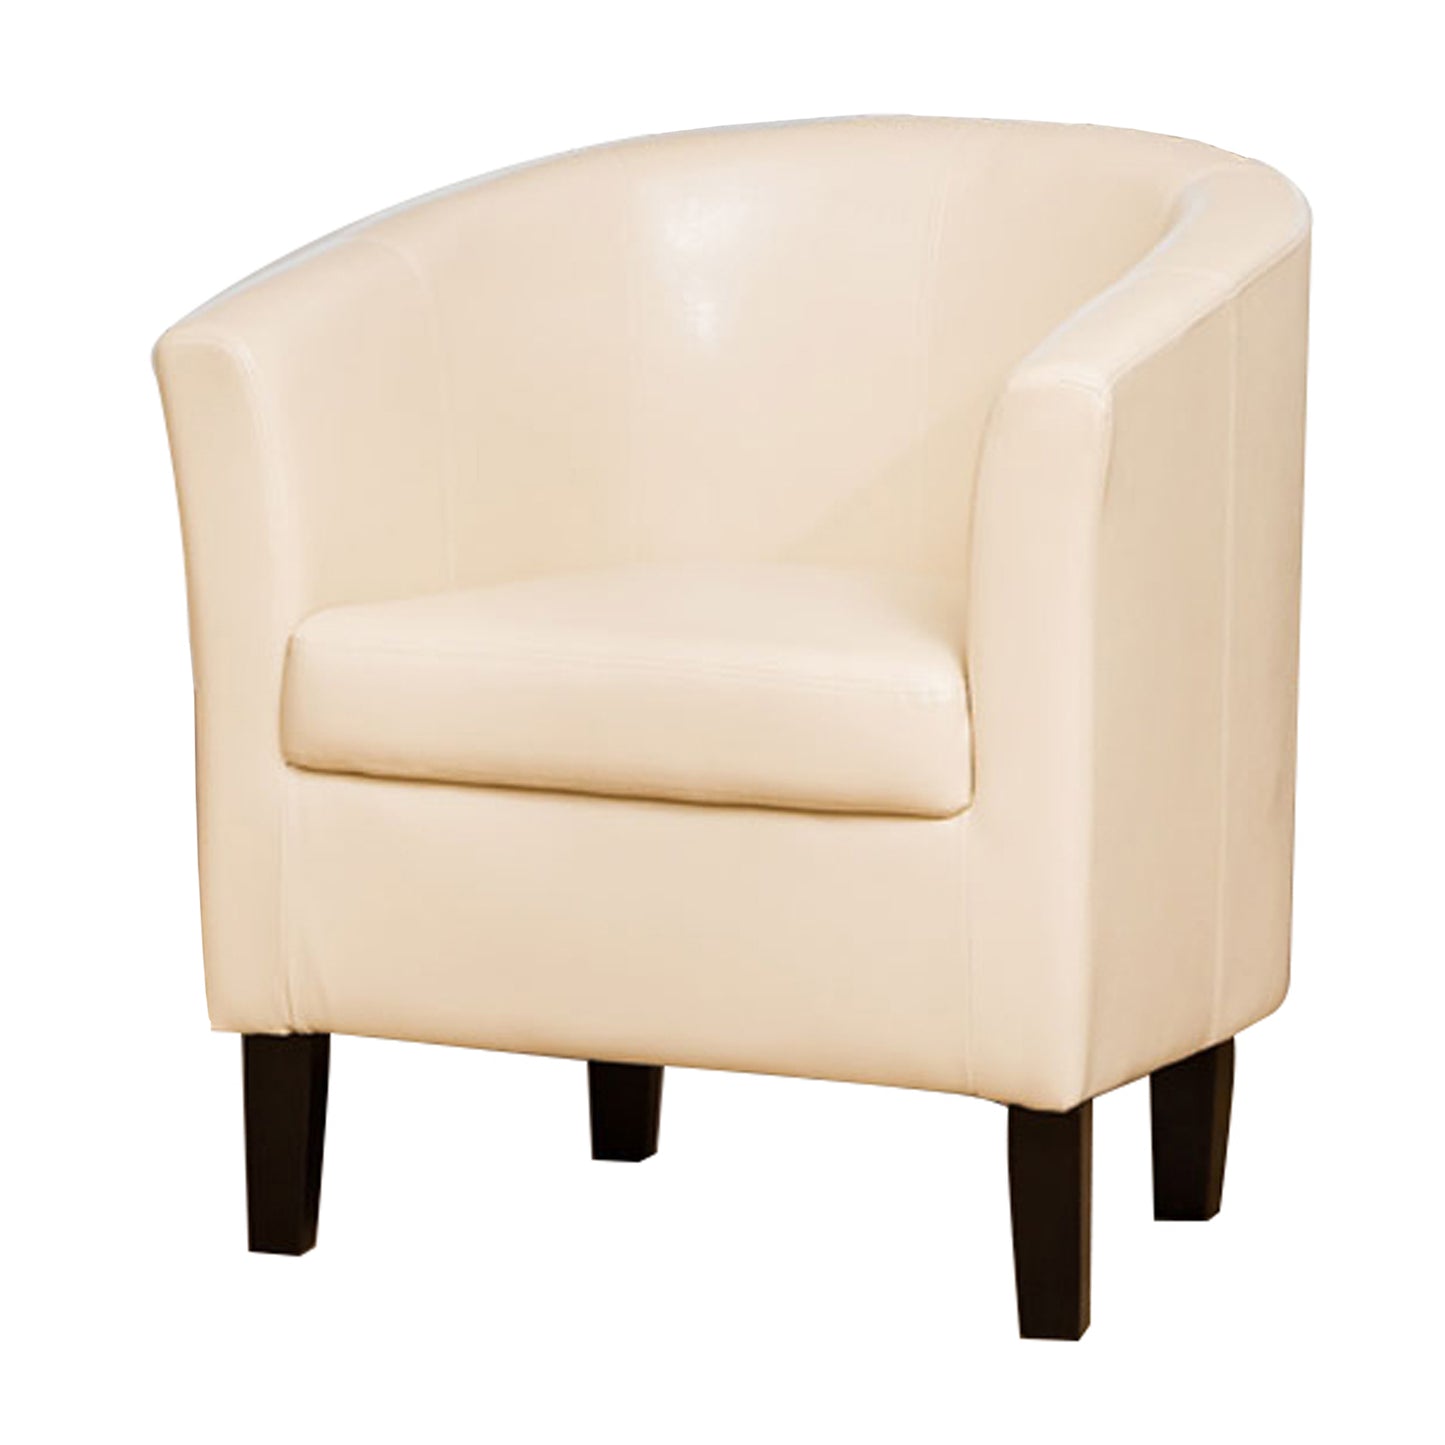 Tub Arm Chair 1 2 or 3 Seat Home Use in black, brown, red or cream. - CasaFenix